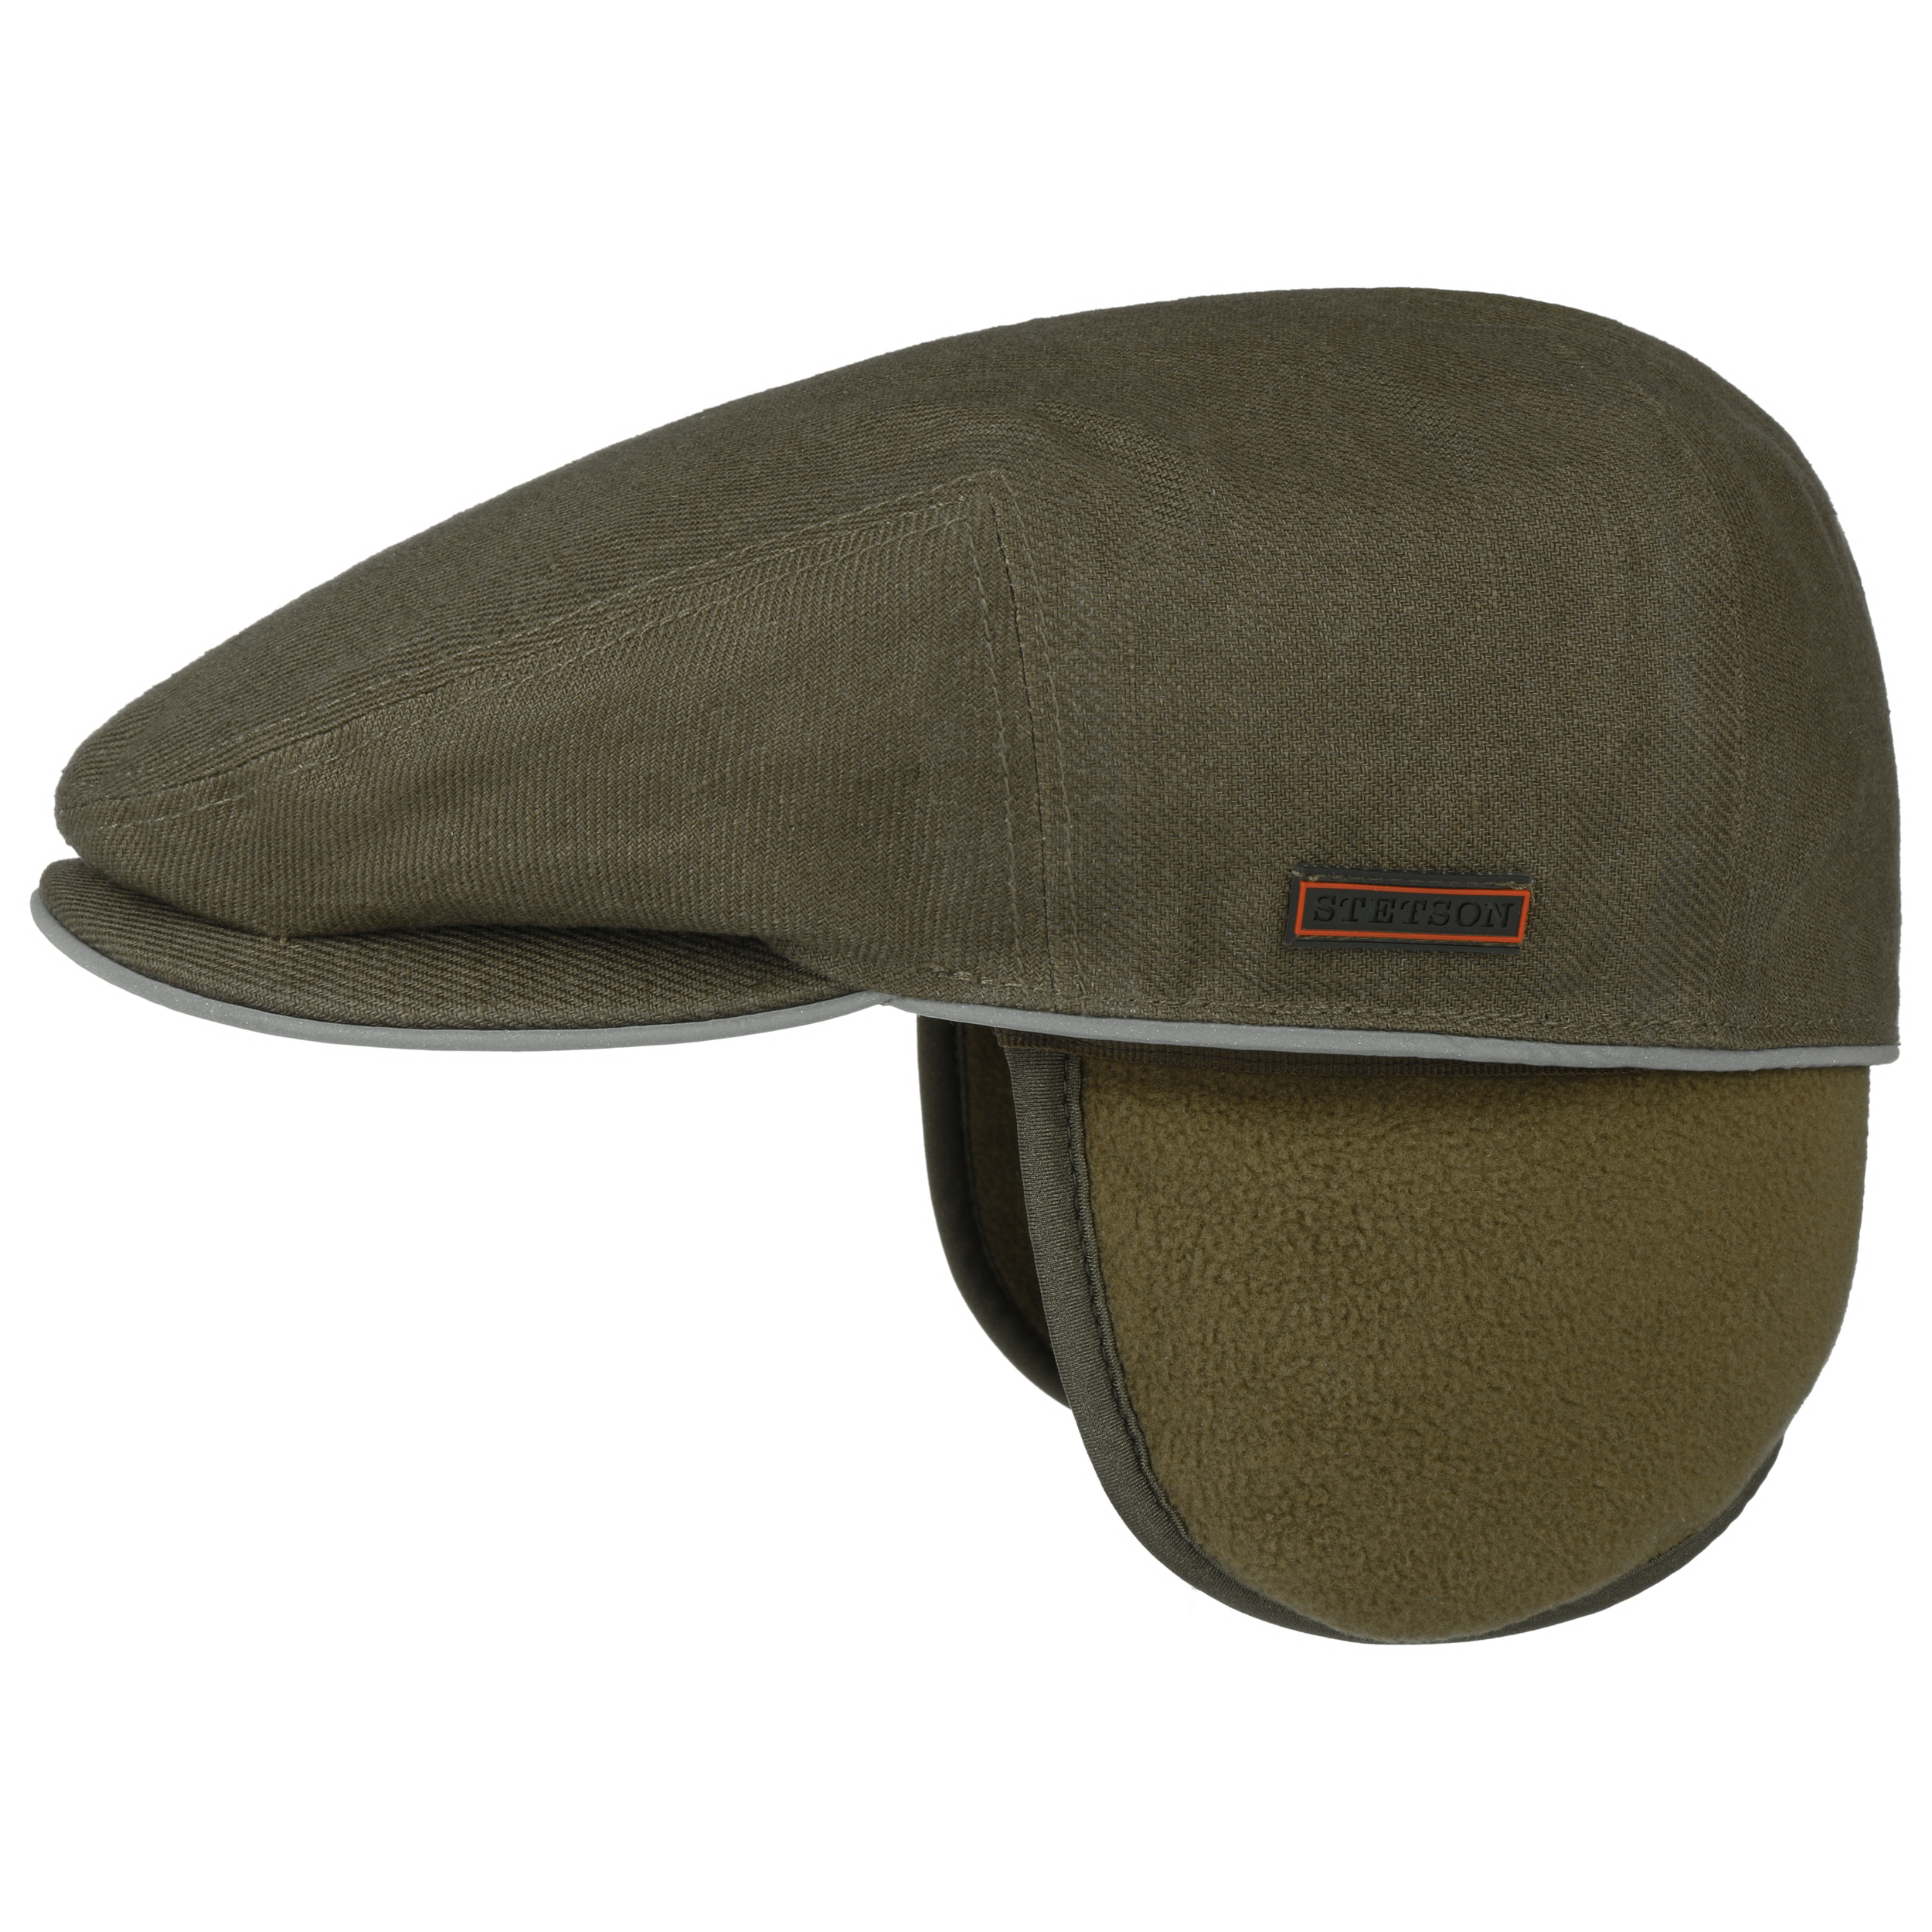 Kent Outdoor Flat Cap With Ear Flaps By Stetson 9900